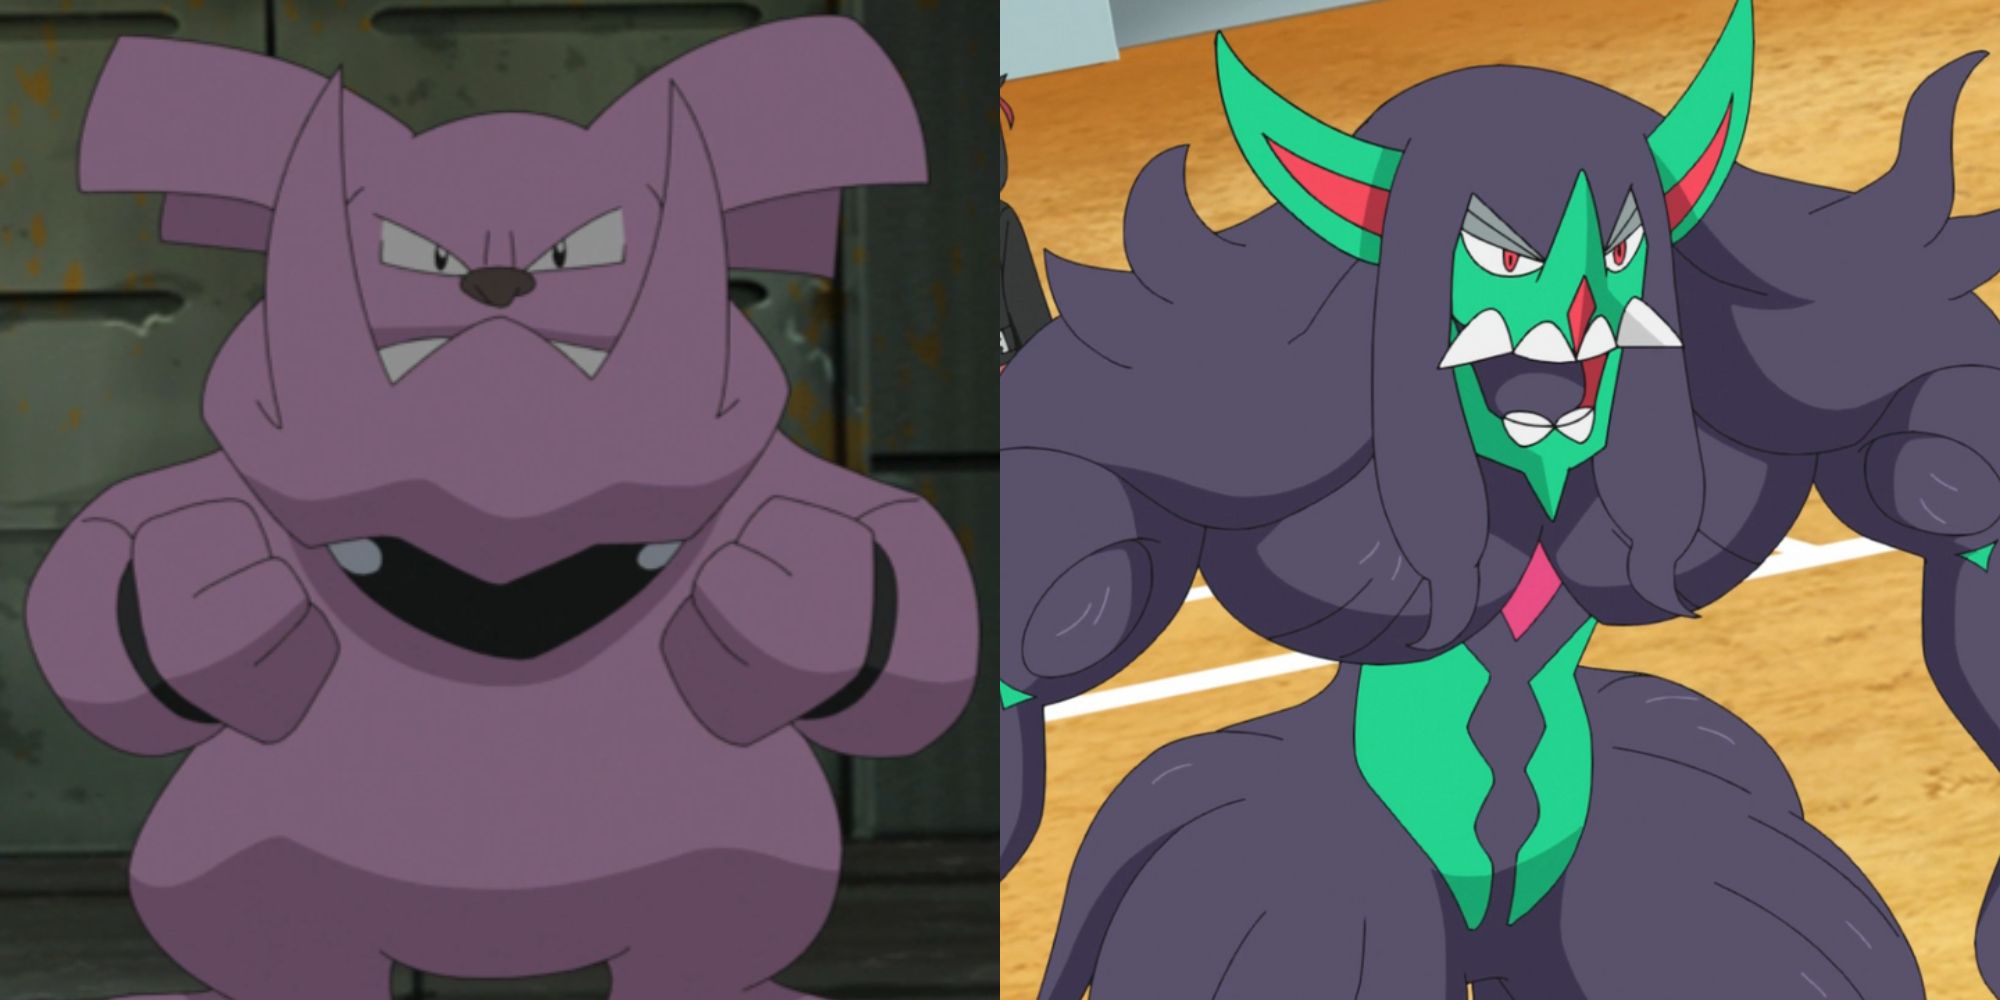 Split image showing Granbull and Grimmsnarl in the Pokémon anime.